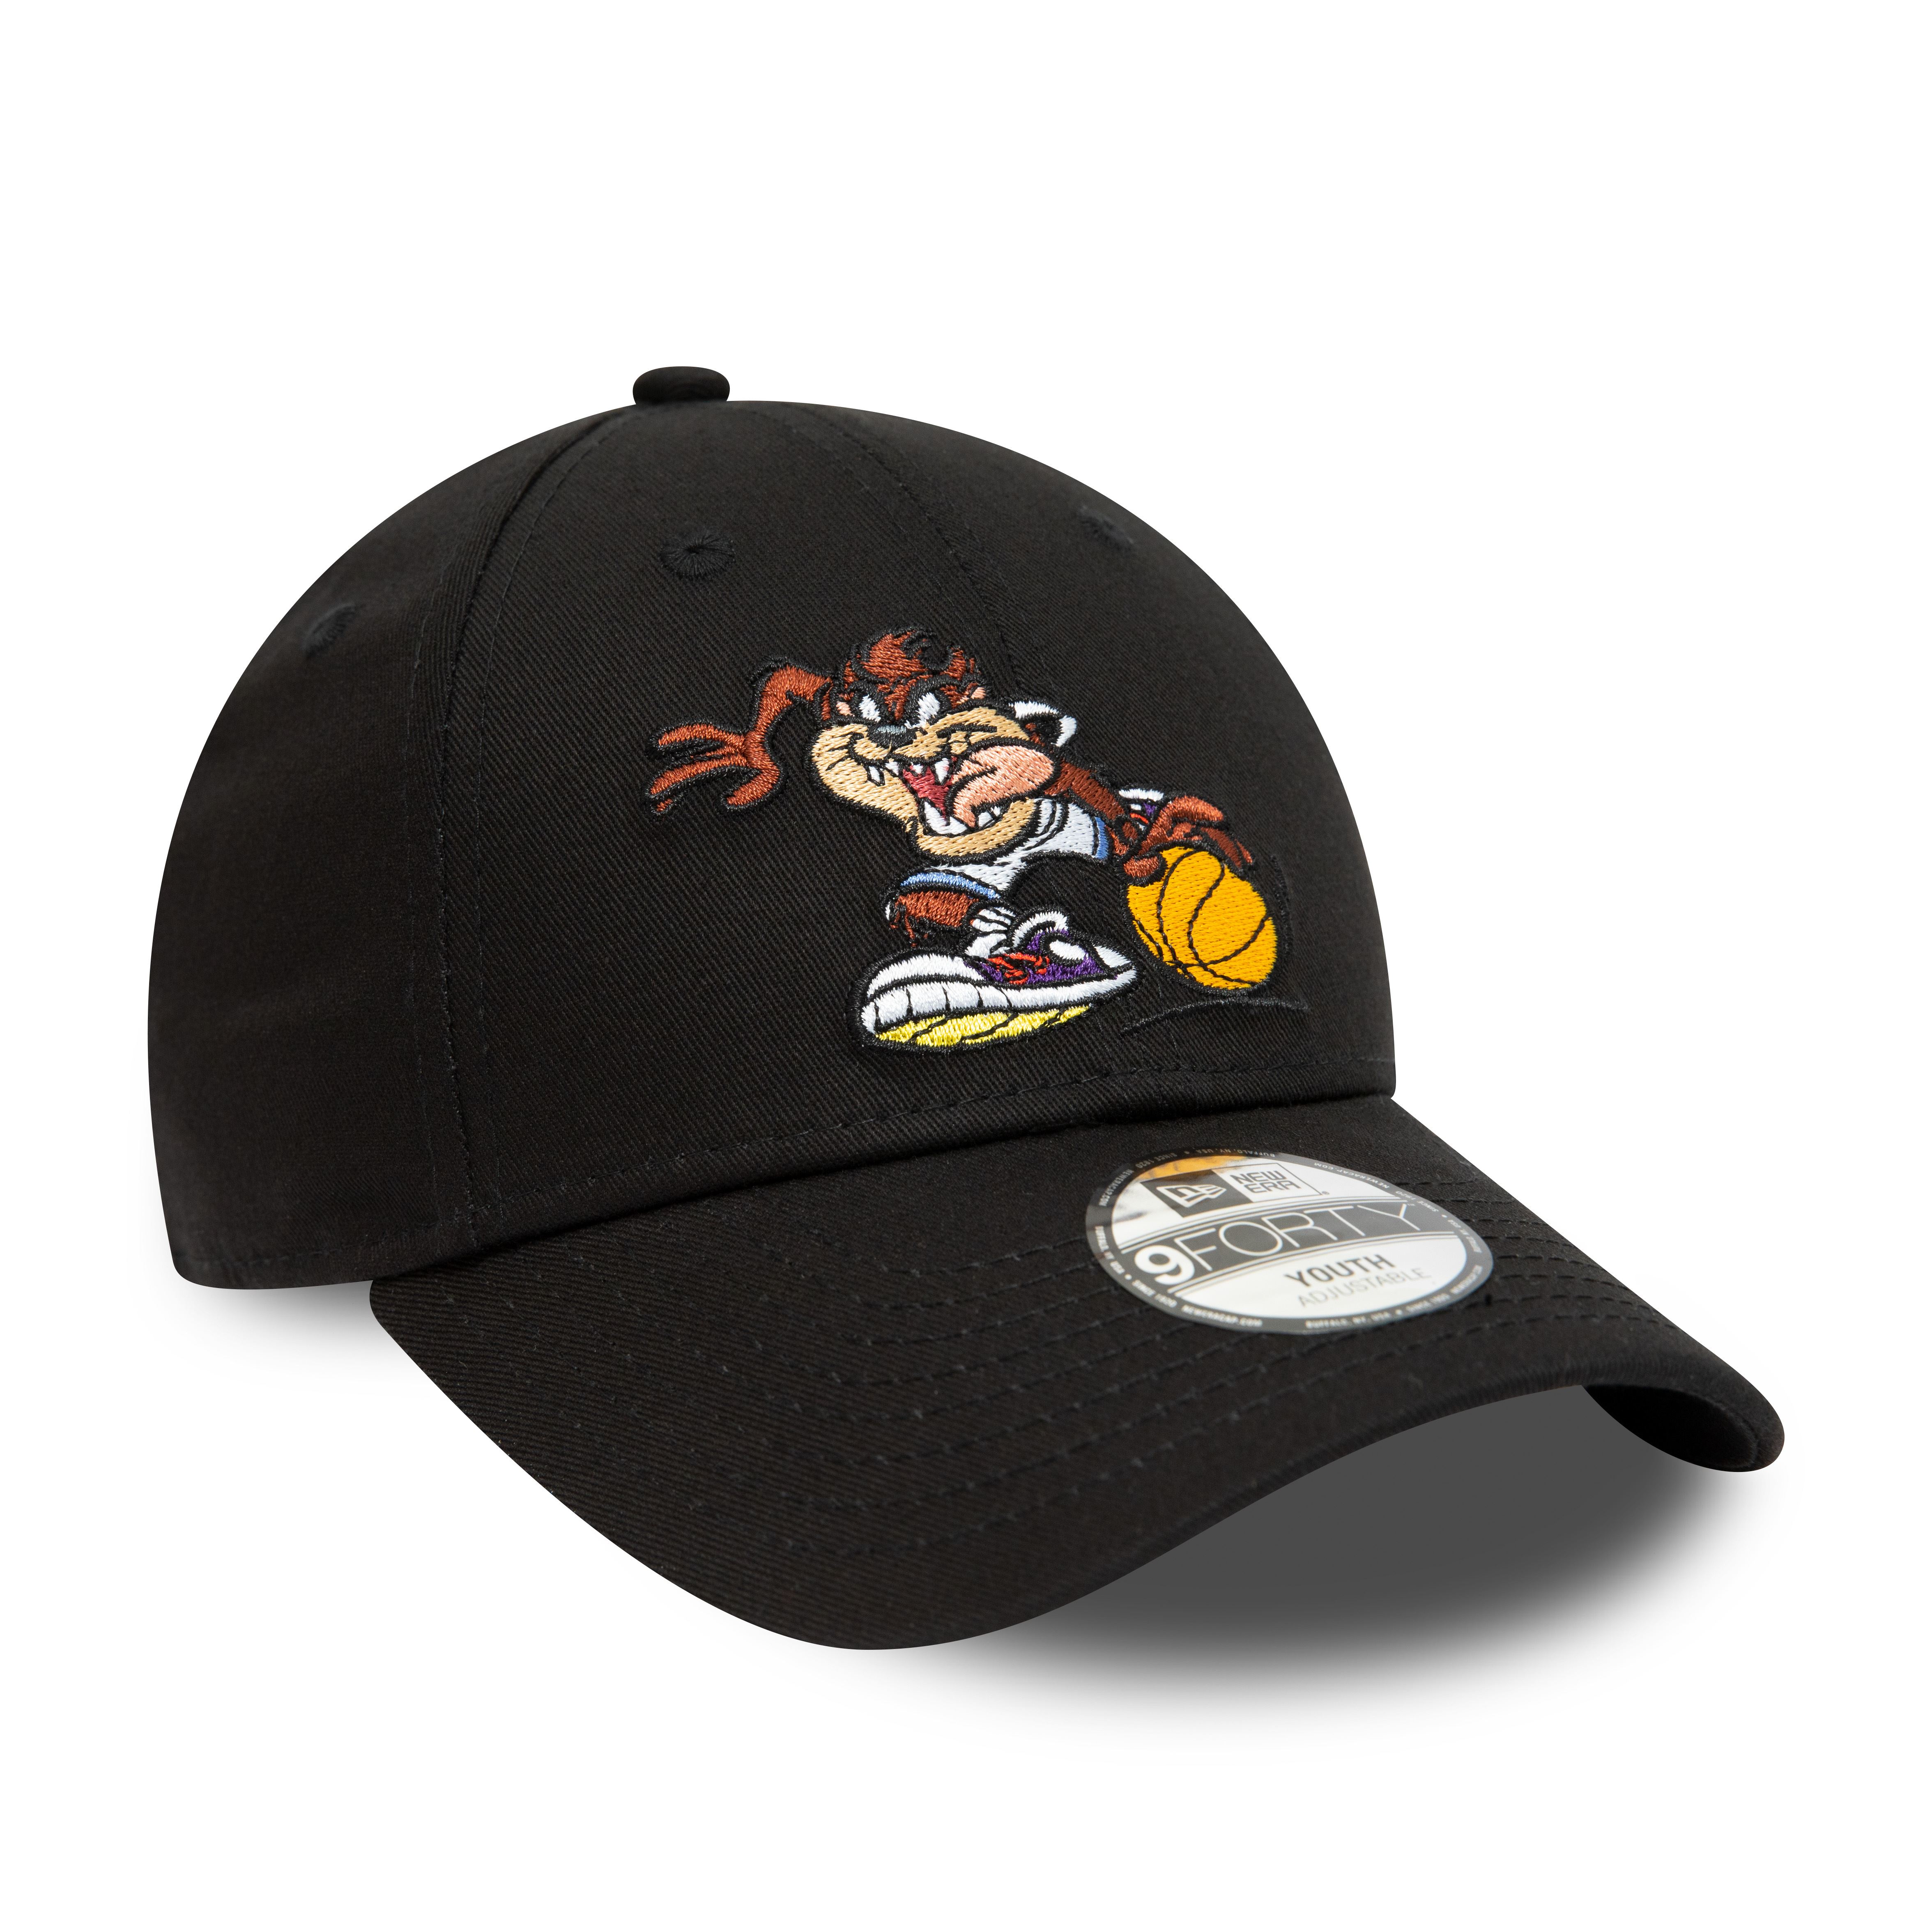 Taz Looney Tunes Character Sporty Black 9Forty Adjustable Cap for Kids New Era